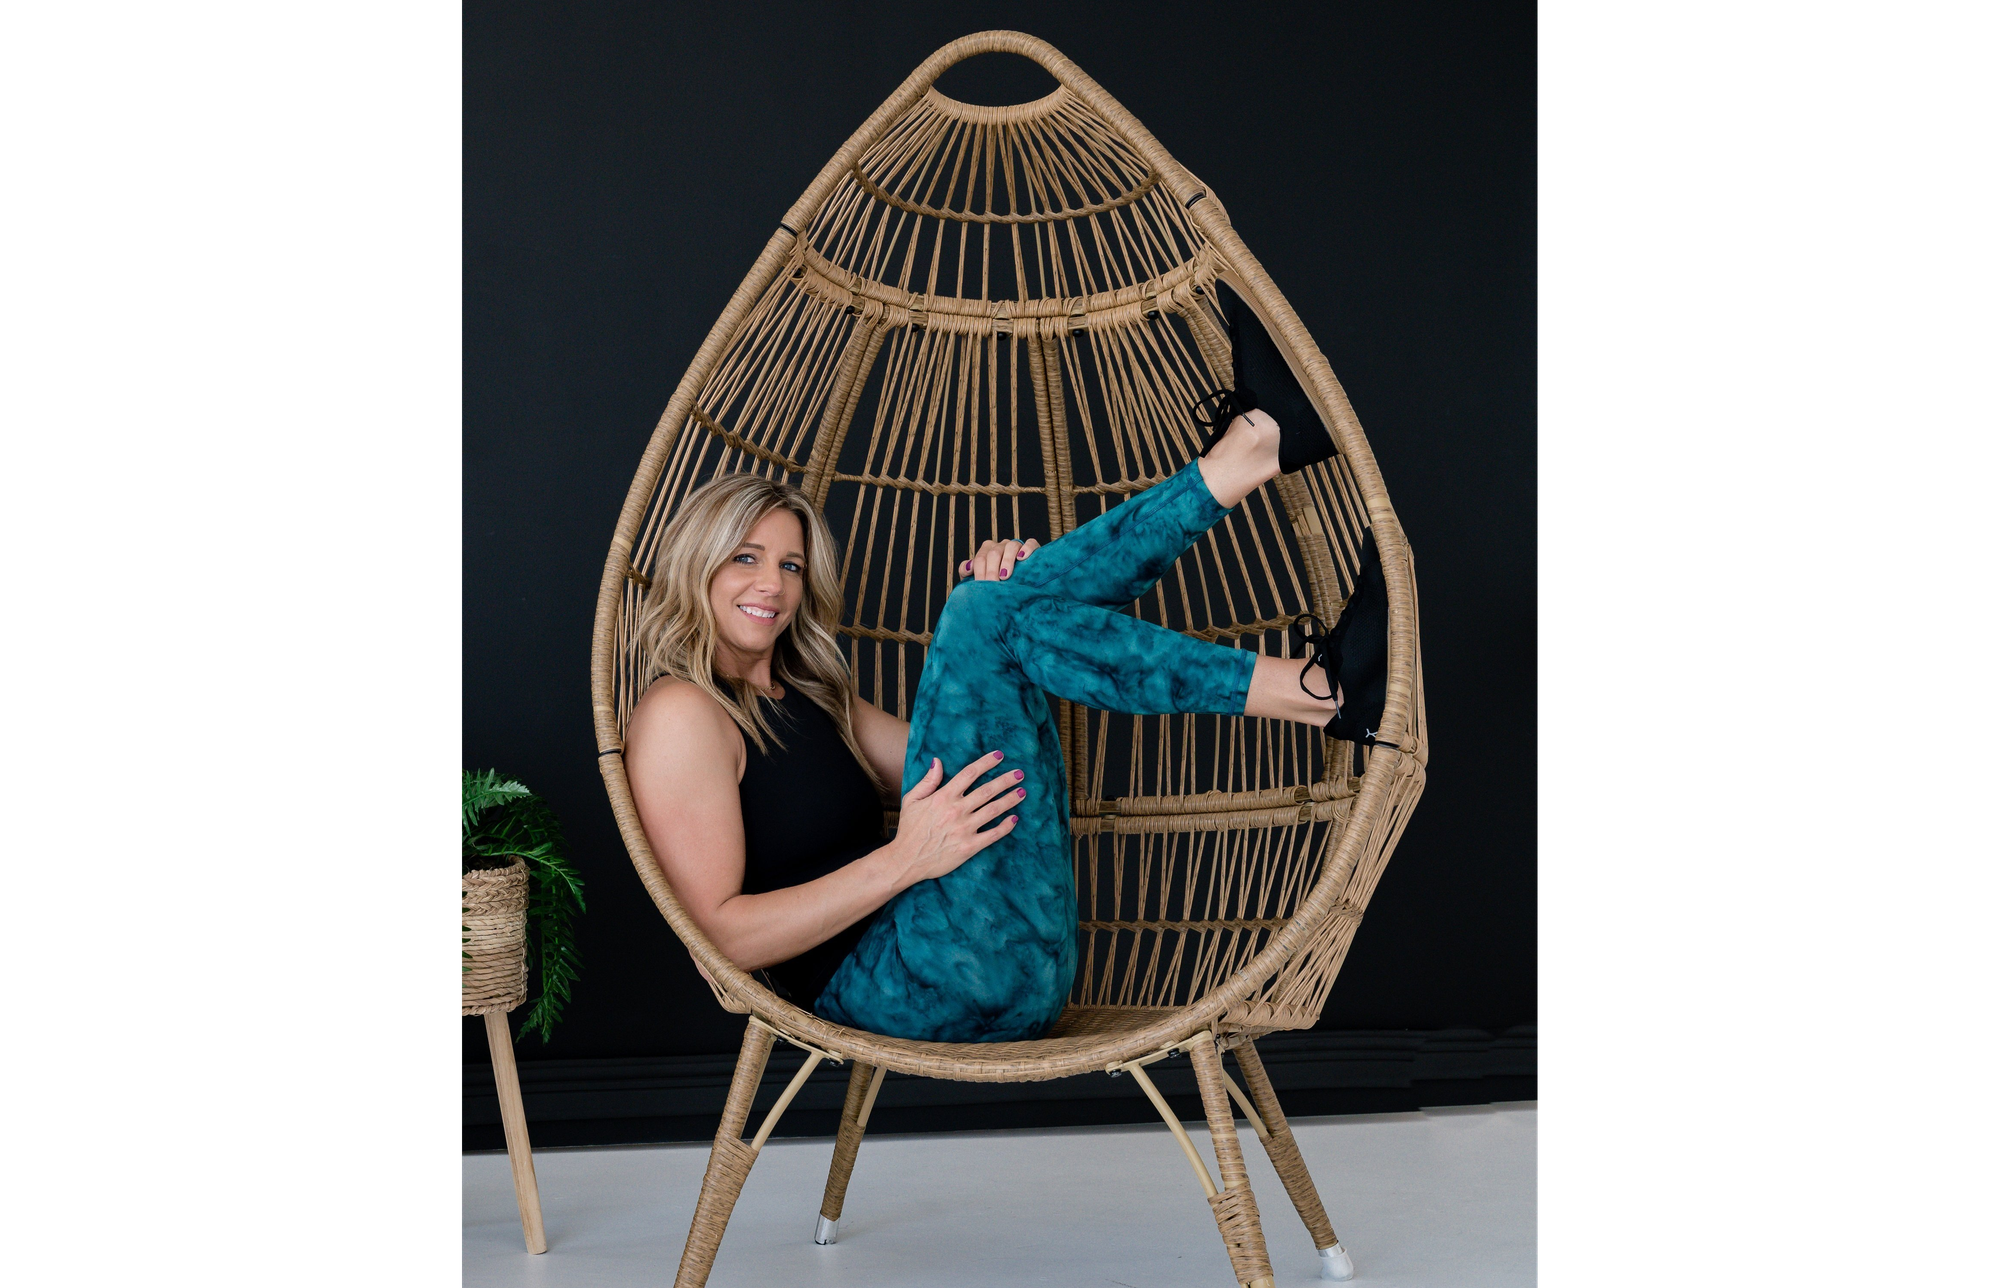 Stacey Roberts: Revolutionizing At-Home Fitness for Everyone